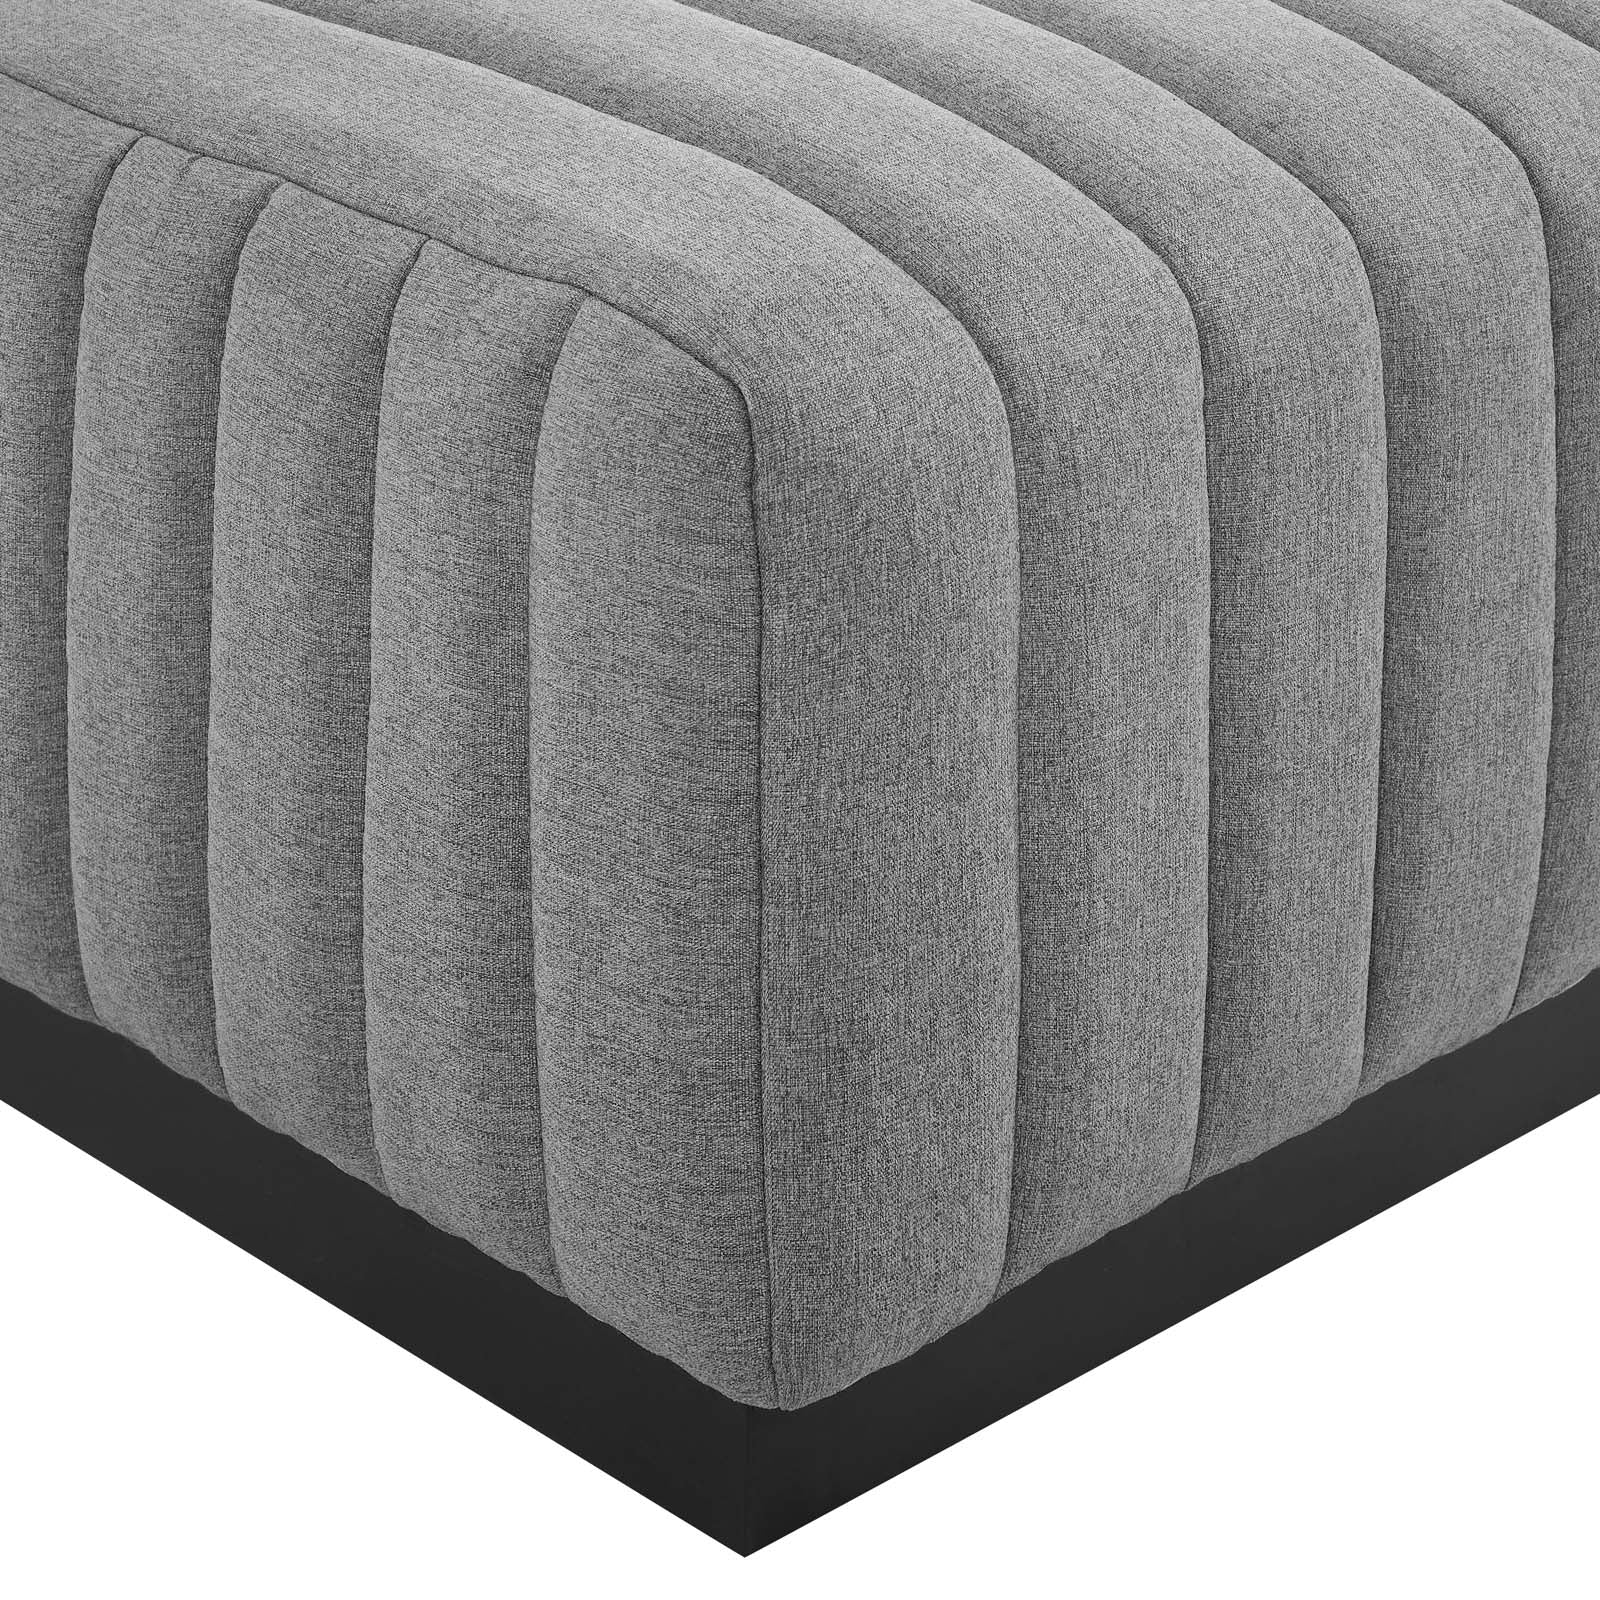 Modway Sectional Sofas - Conjure Channel Tufted Upholstered Fabric 5-Piece Sectional Black Light Gray